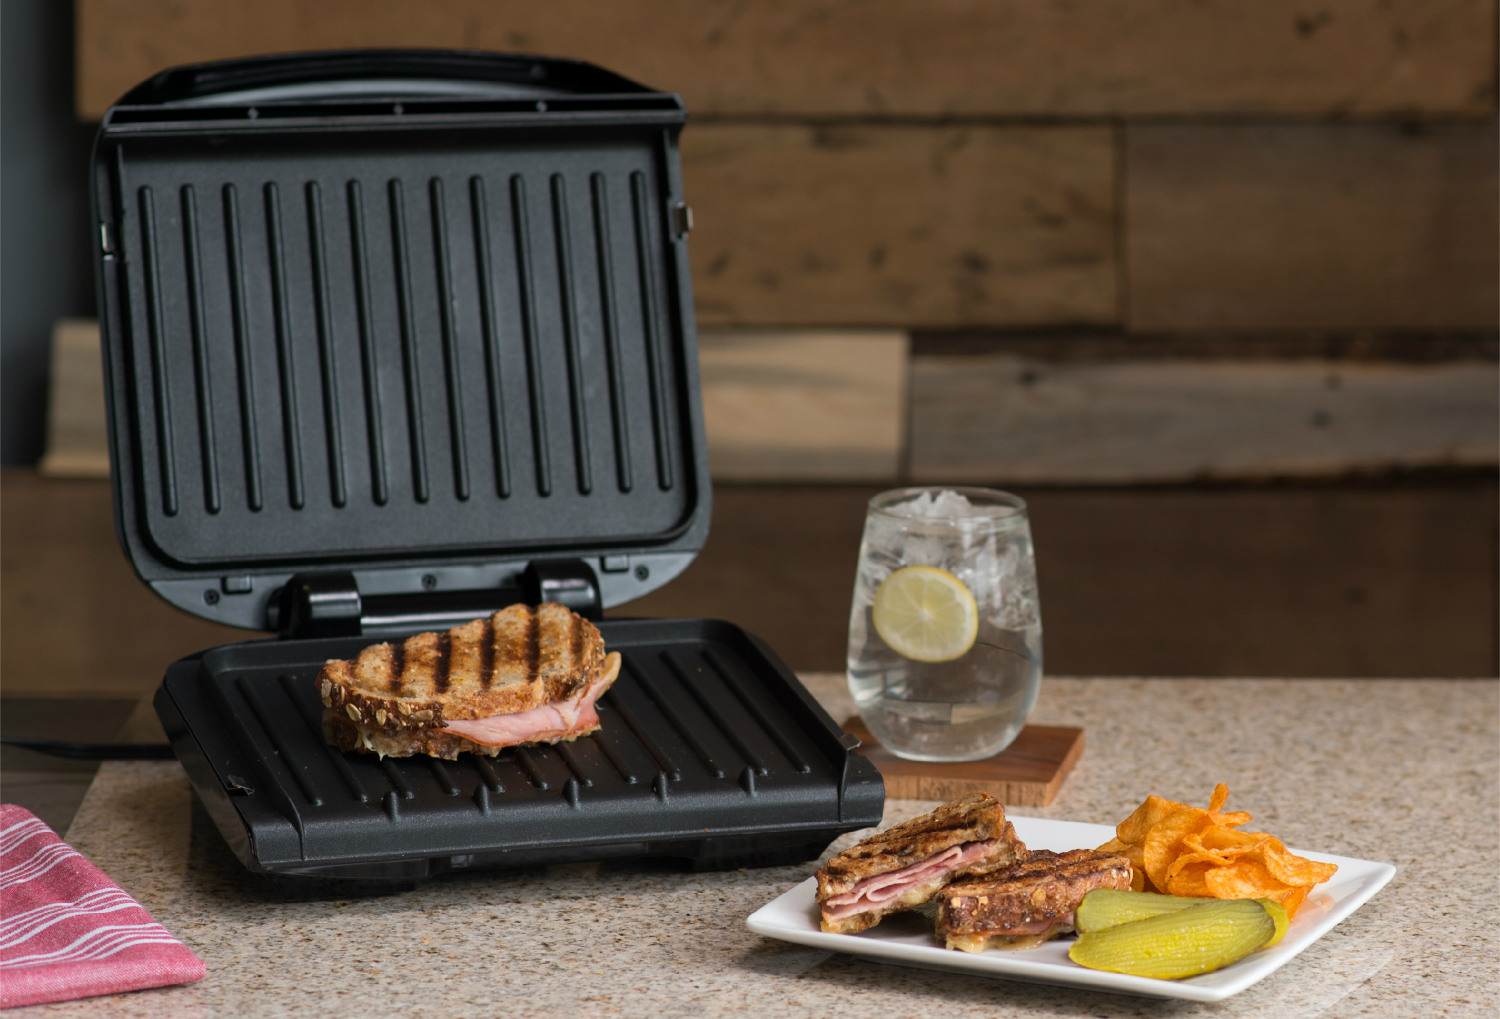 Walmart Sears the Prices for George Foreman Electric Grills and